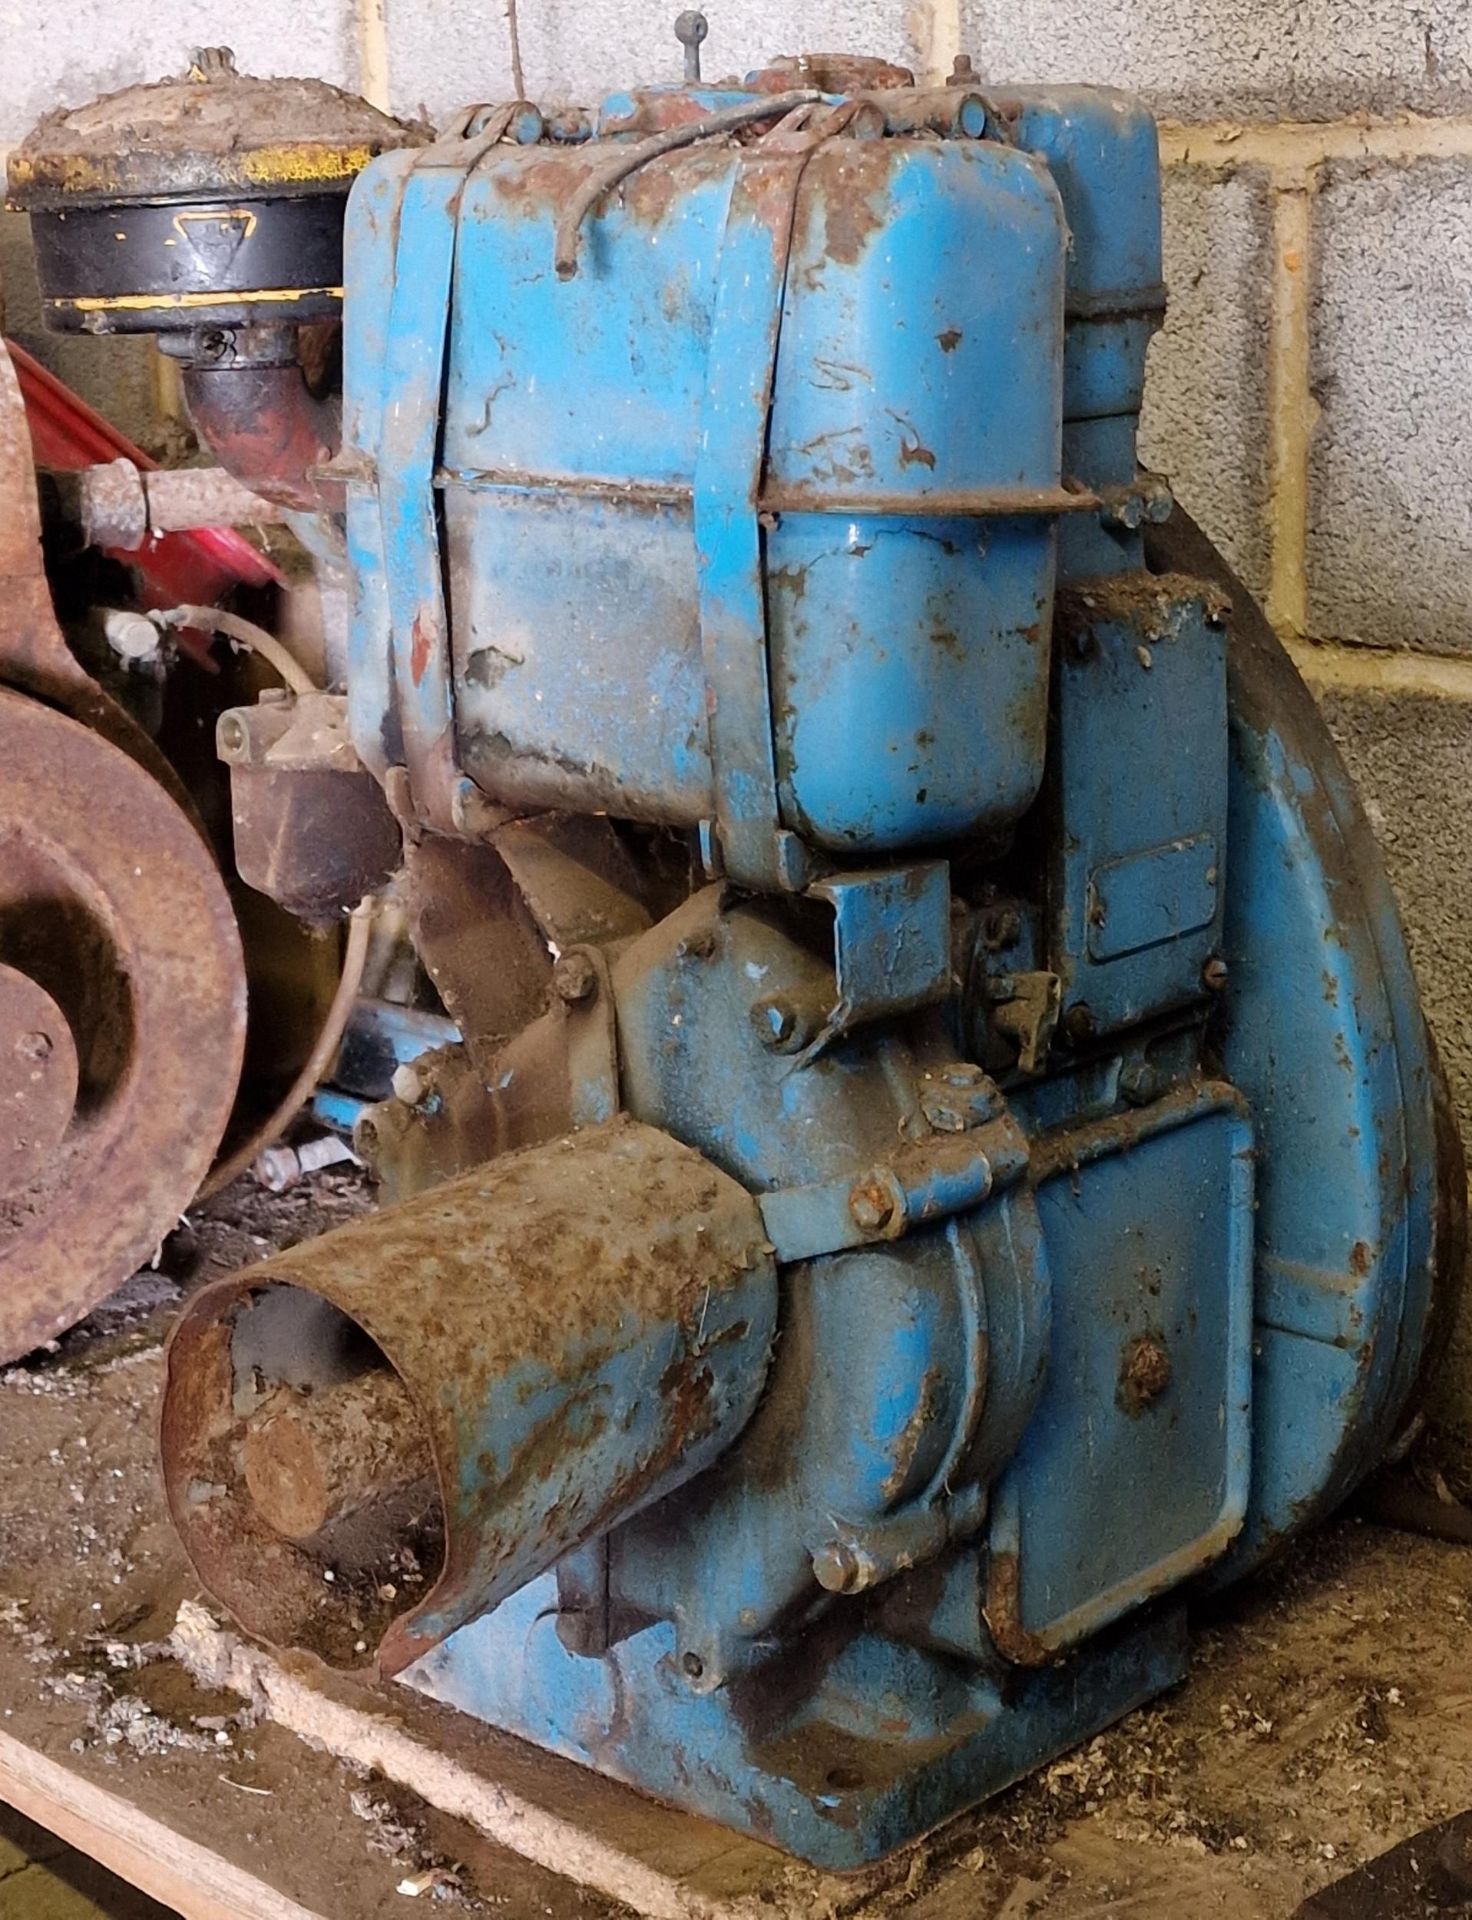 Vintage Lister stationary engine with blue painted finish